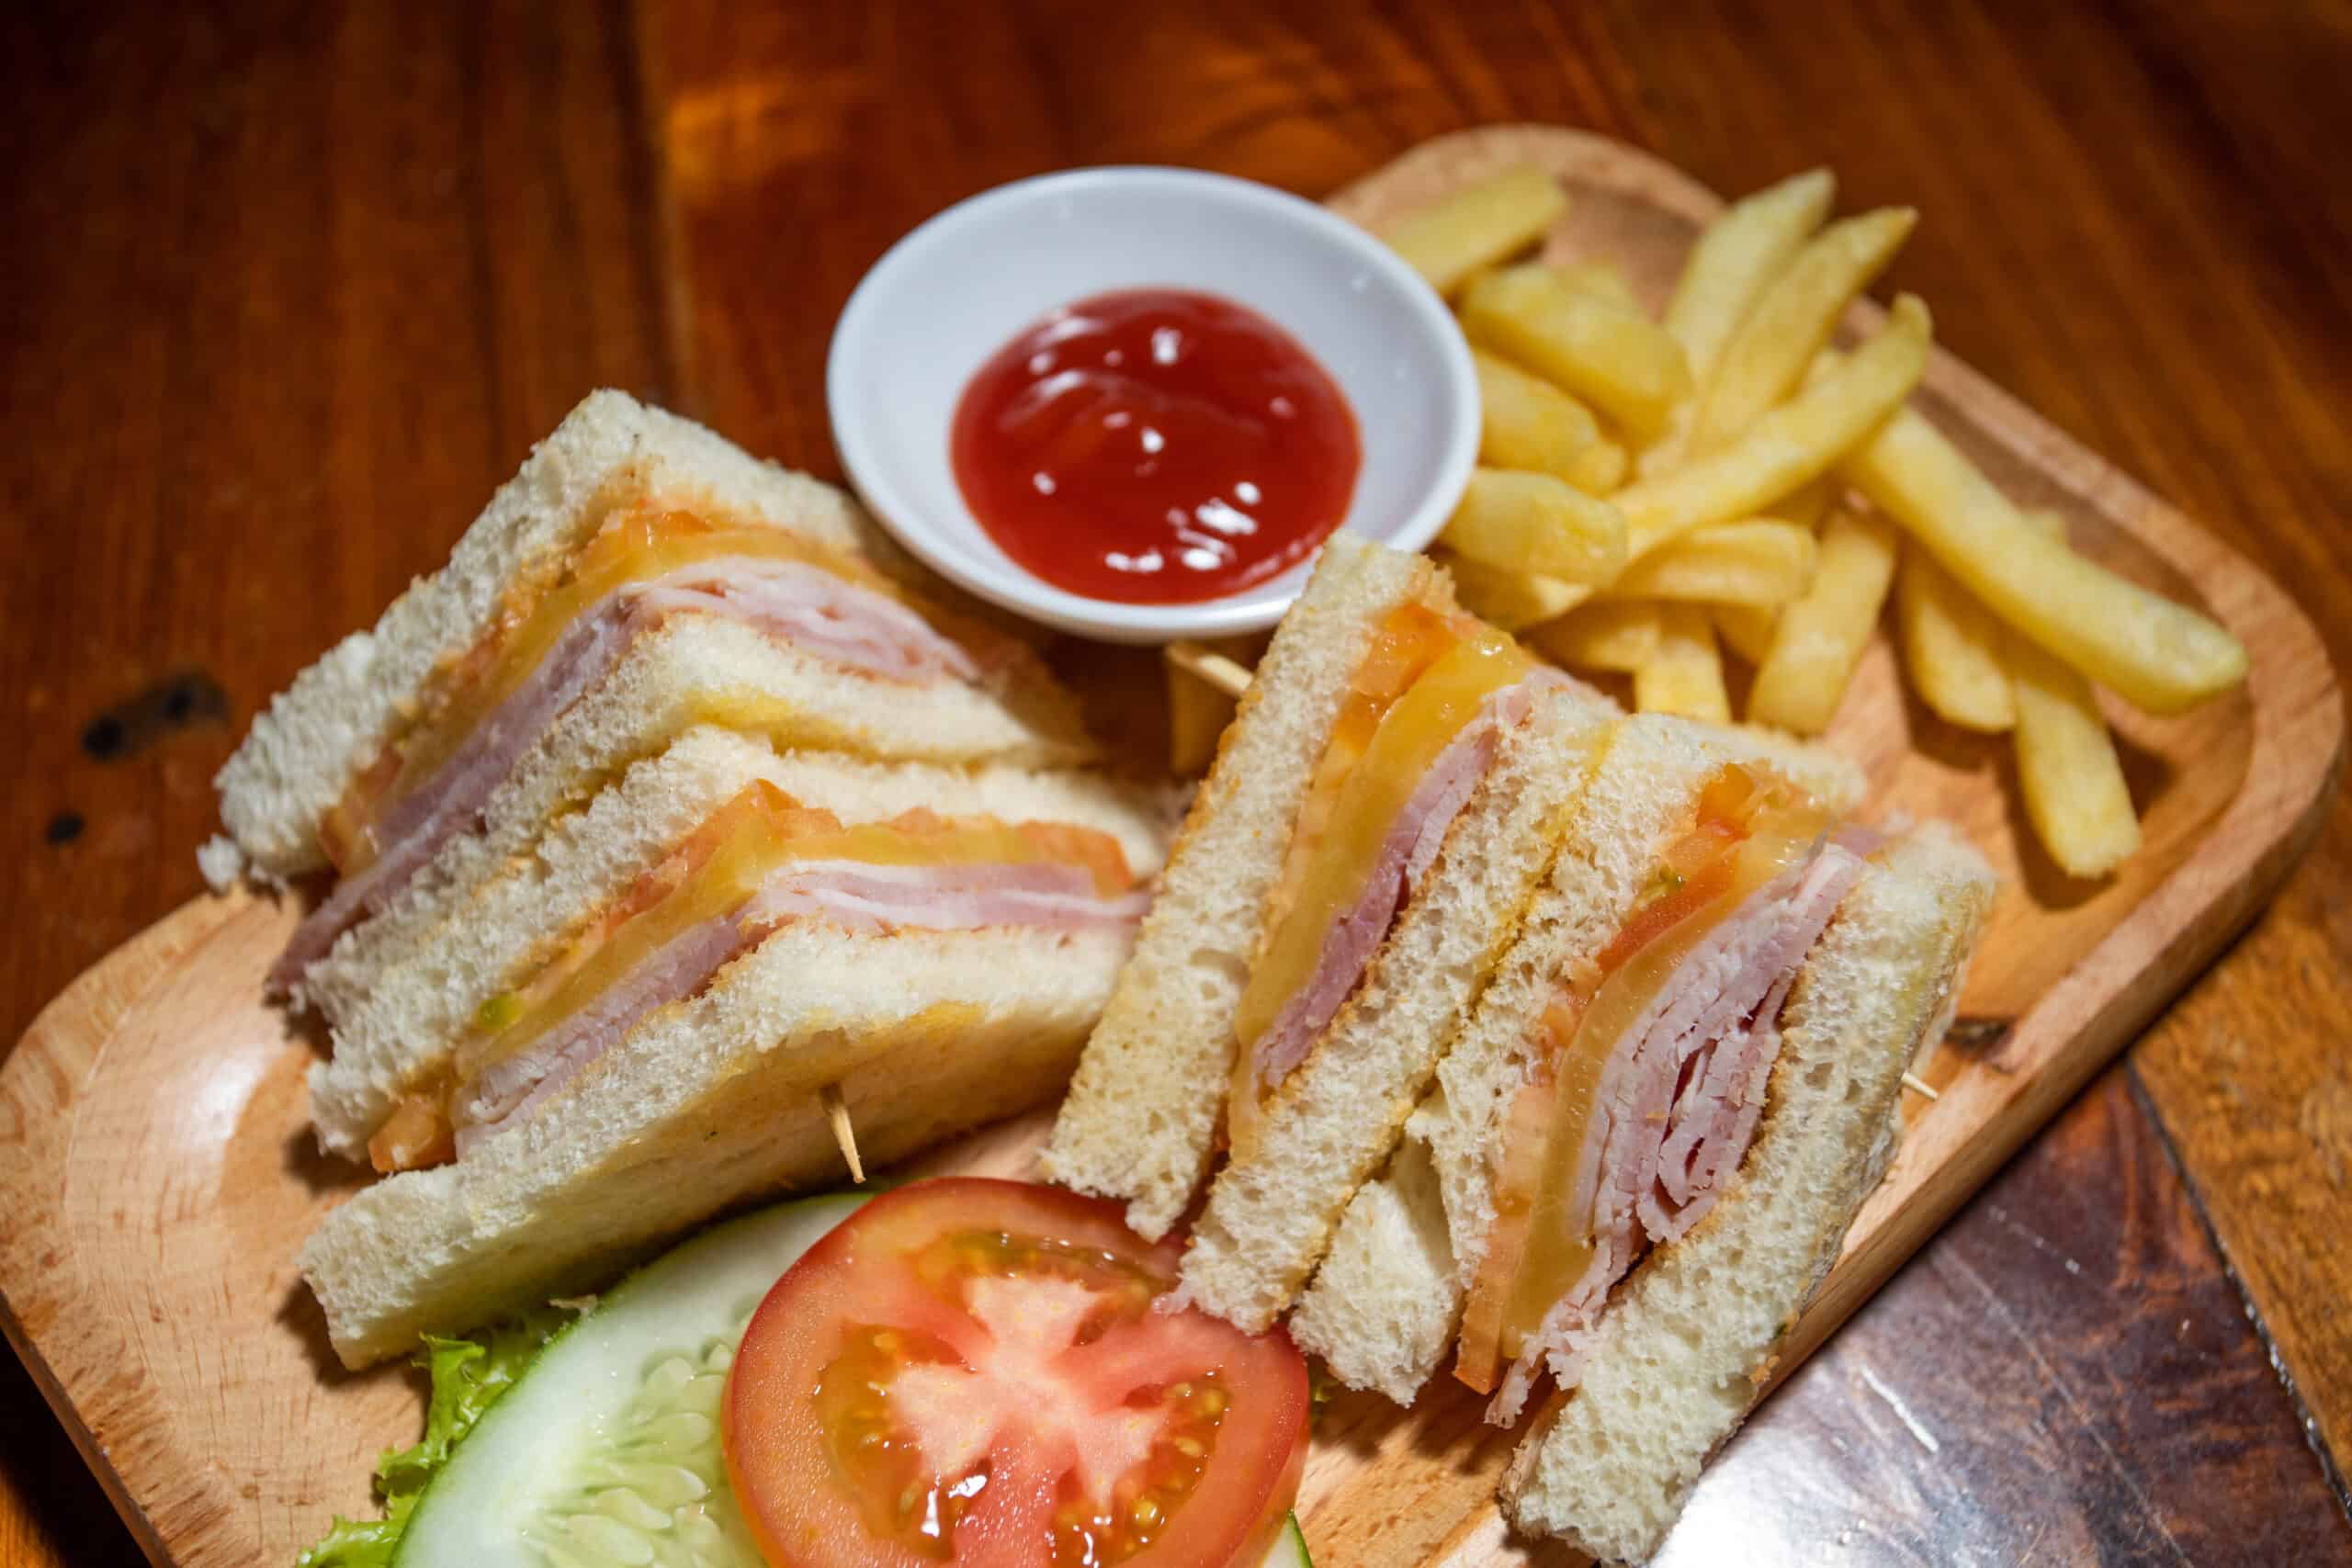 ham and cheese toastie with lettuce and tomato at the Rabbit hole Irish Sports Bar